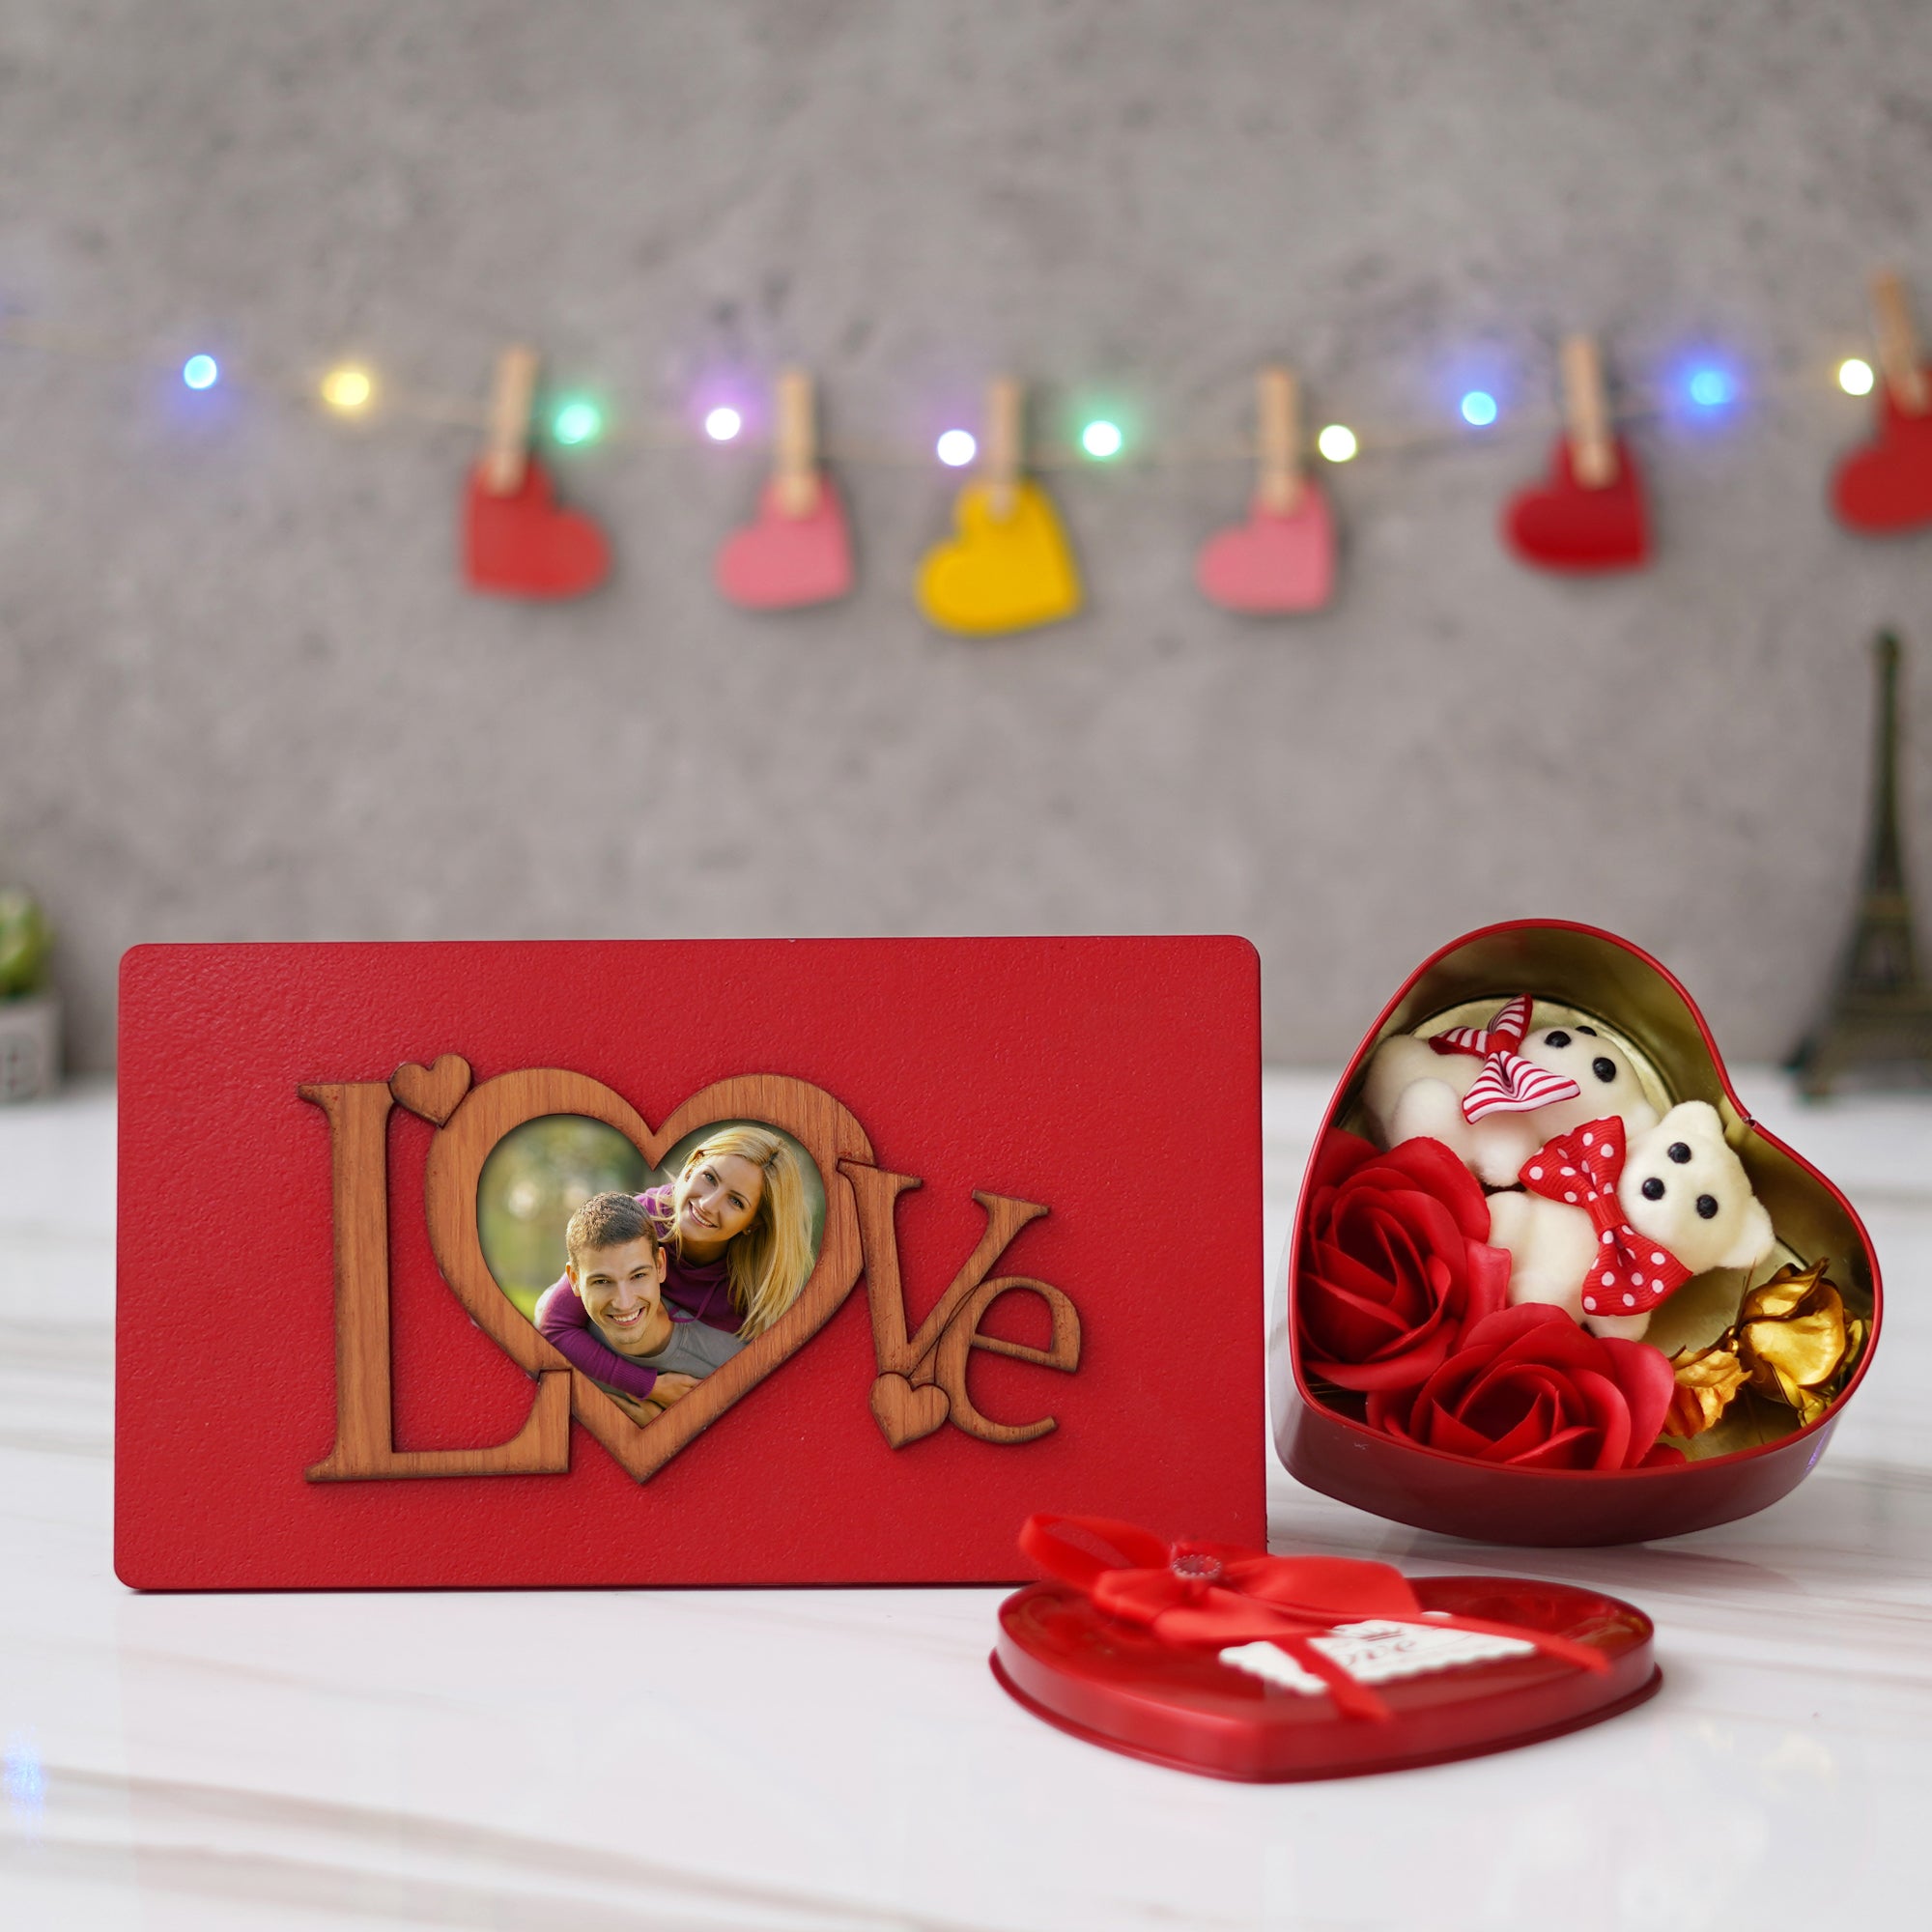 Valentine Combo of "Love" Wooden Photo Frame With Red Stand, Red Heart Shaped Gift Box